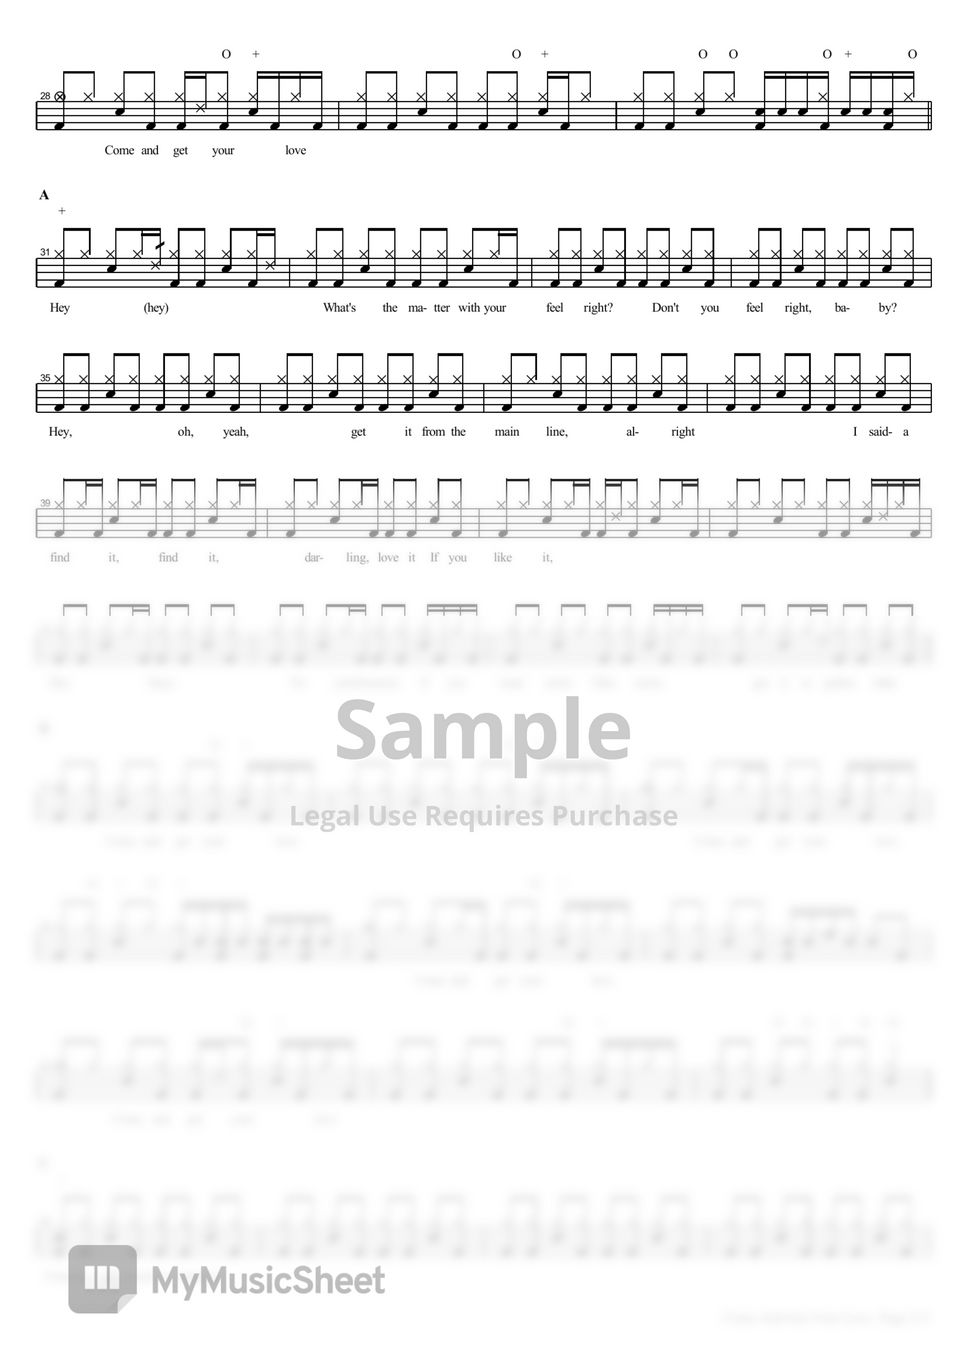 Worksheet: Copy The Lyrics of The Song COME AND GET YOUR LOVE by REDBONE, PDF, Recorded Music